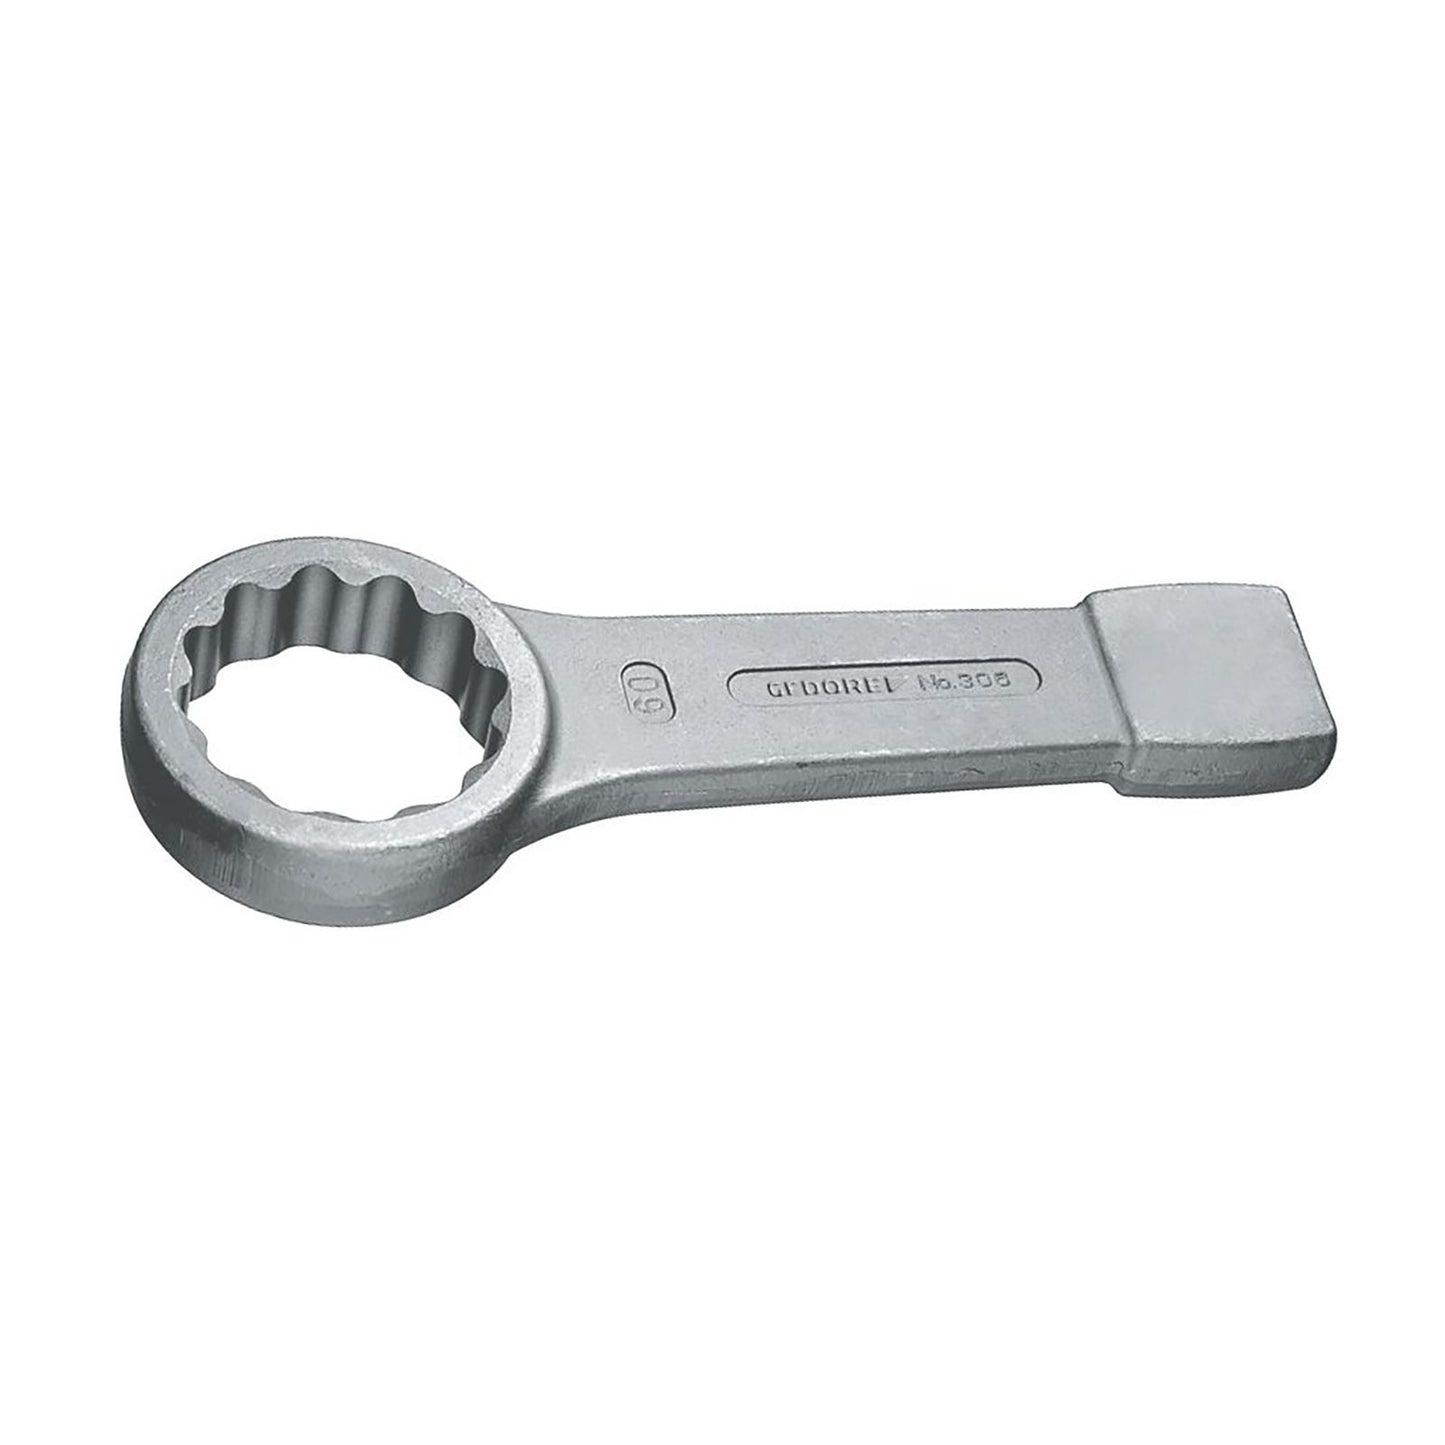 GEDORE 306 85 - Closed Strike Wrench, 85mm (6476590)